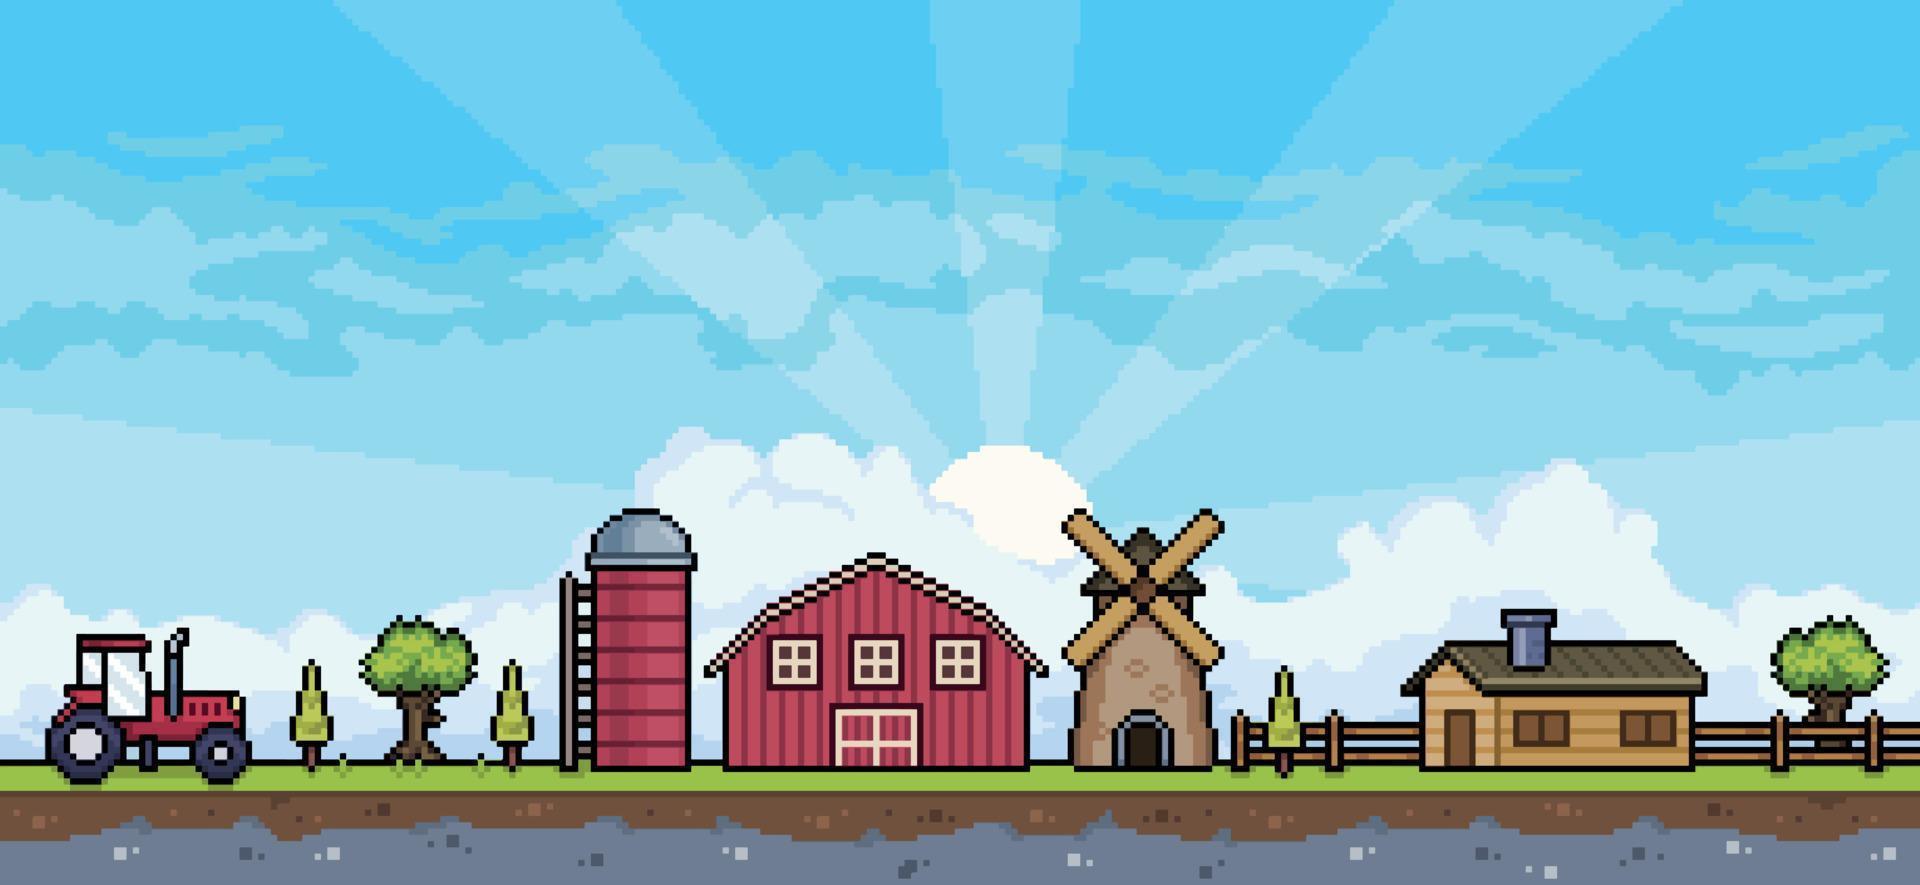 Pixel art farm scene with tractor, barn, silo, mill, house. Landscape background for 8bit game vector